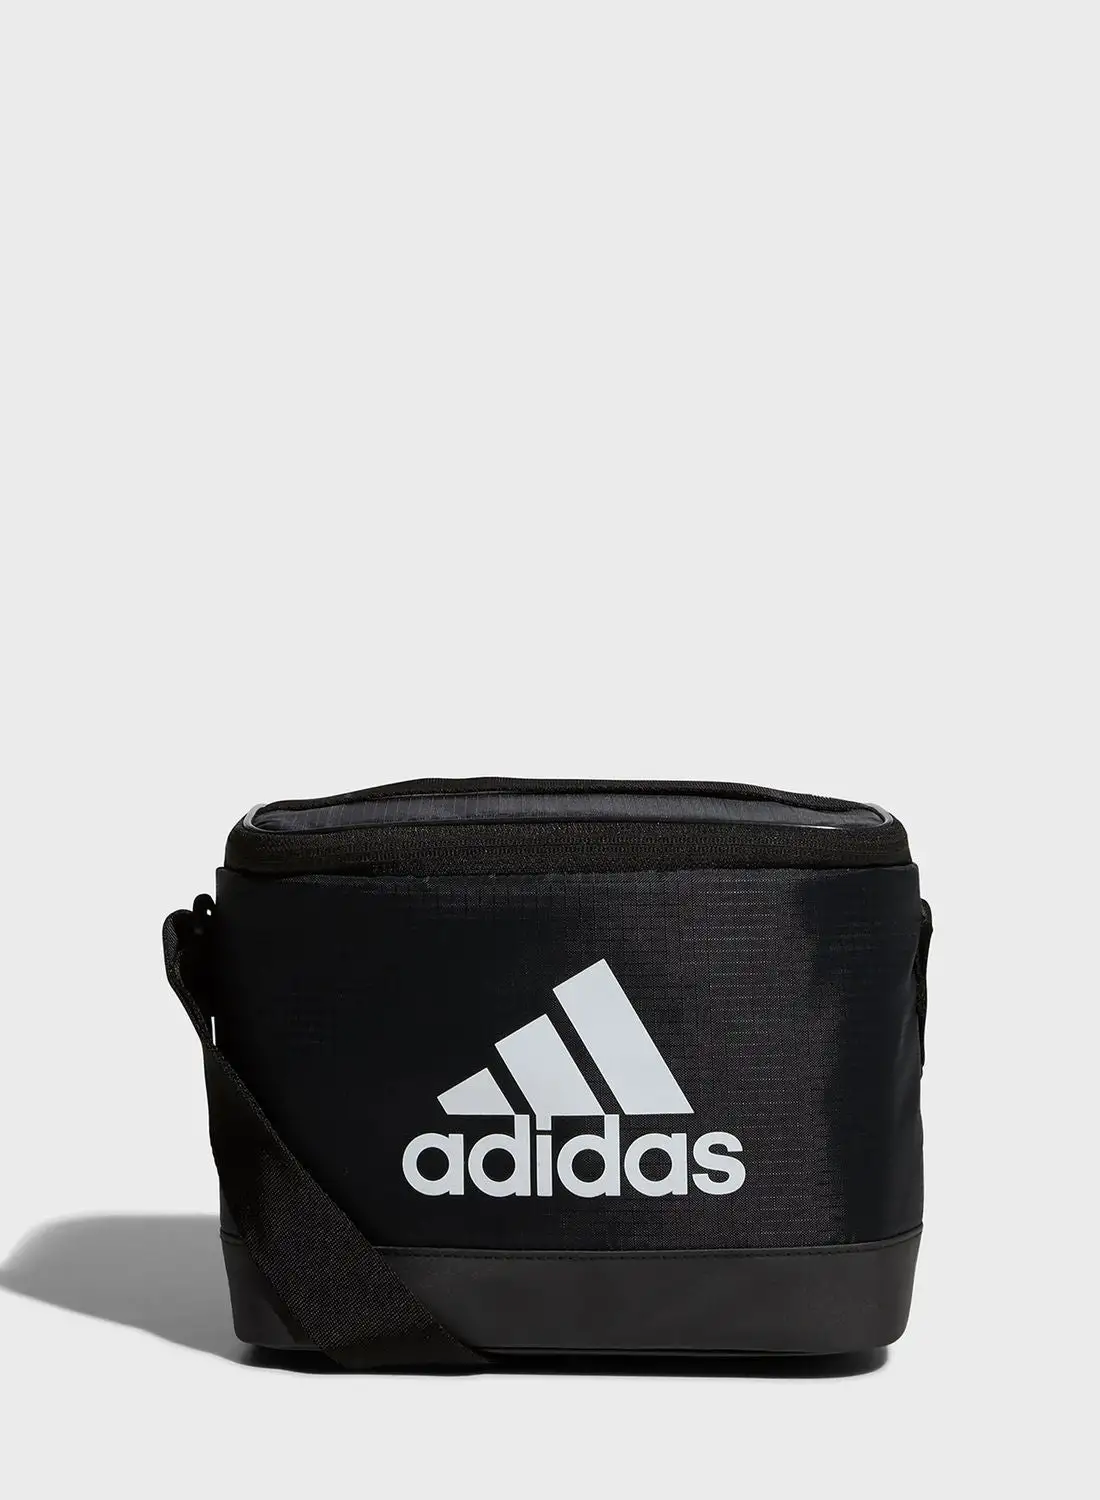 Adidas Cooler Lunch Bag